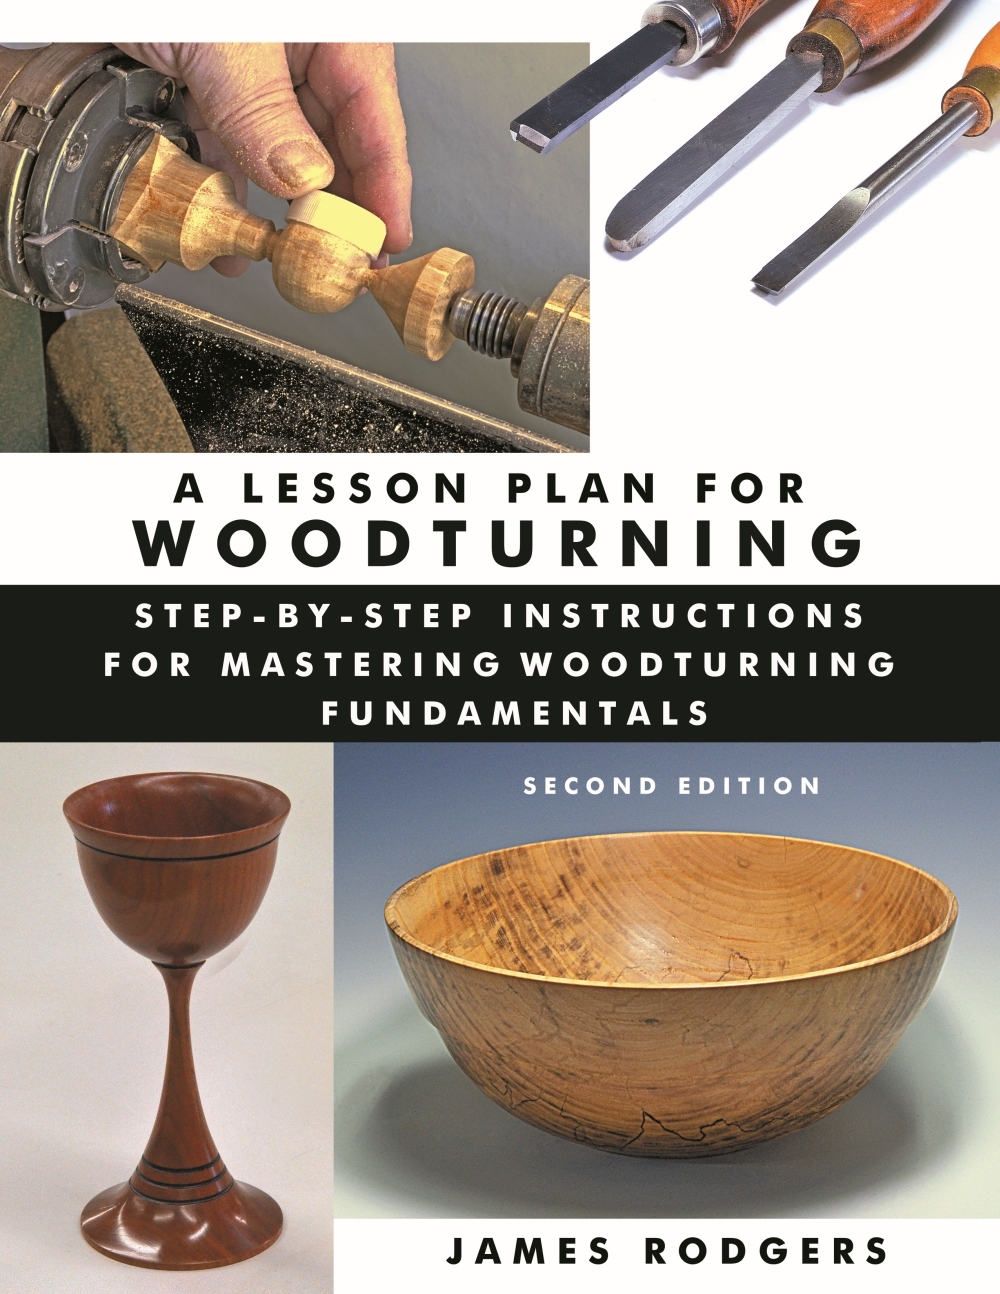 A Lesson Plan for Woodturning, 2nd Edition